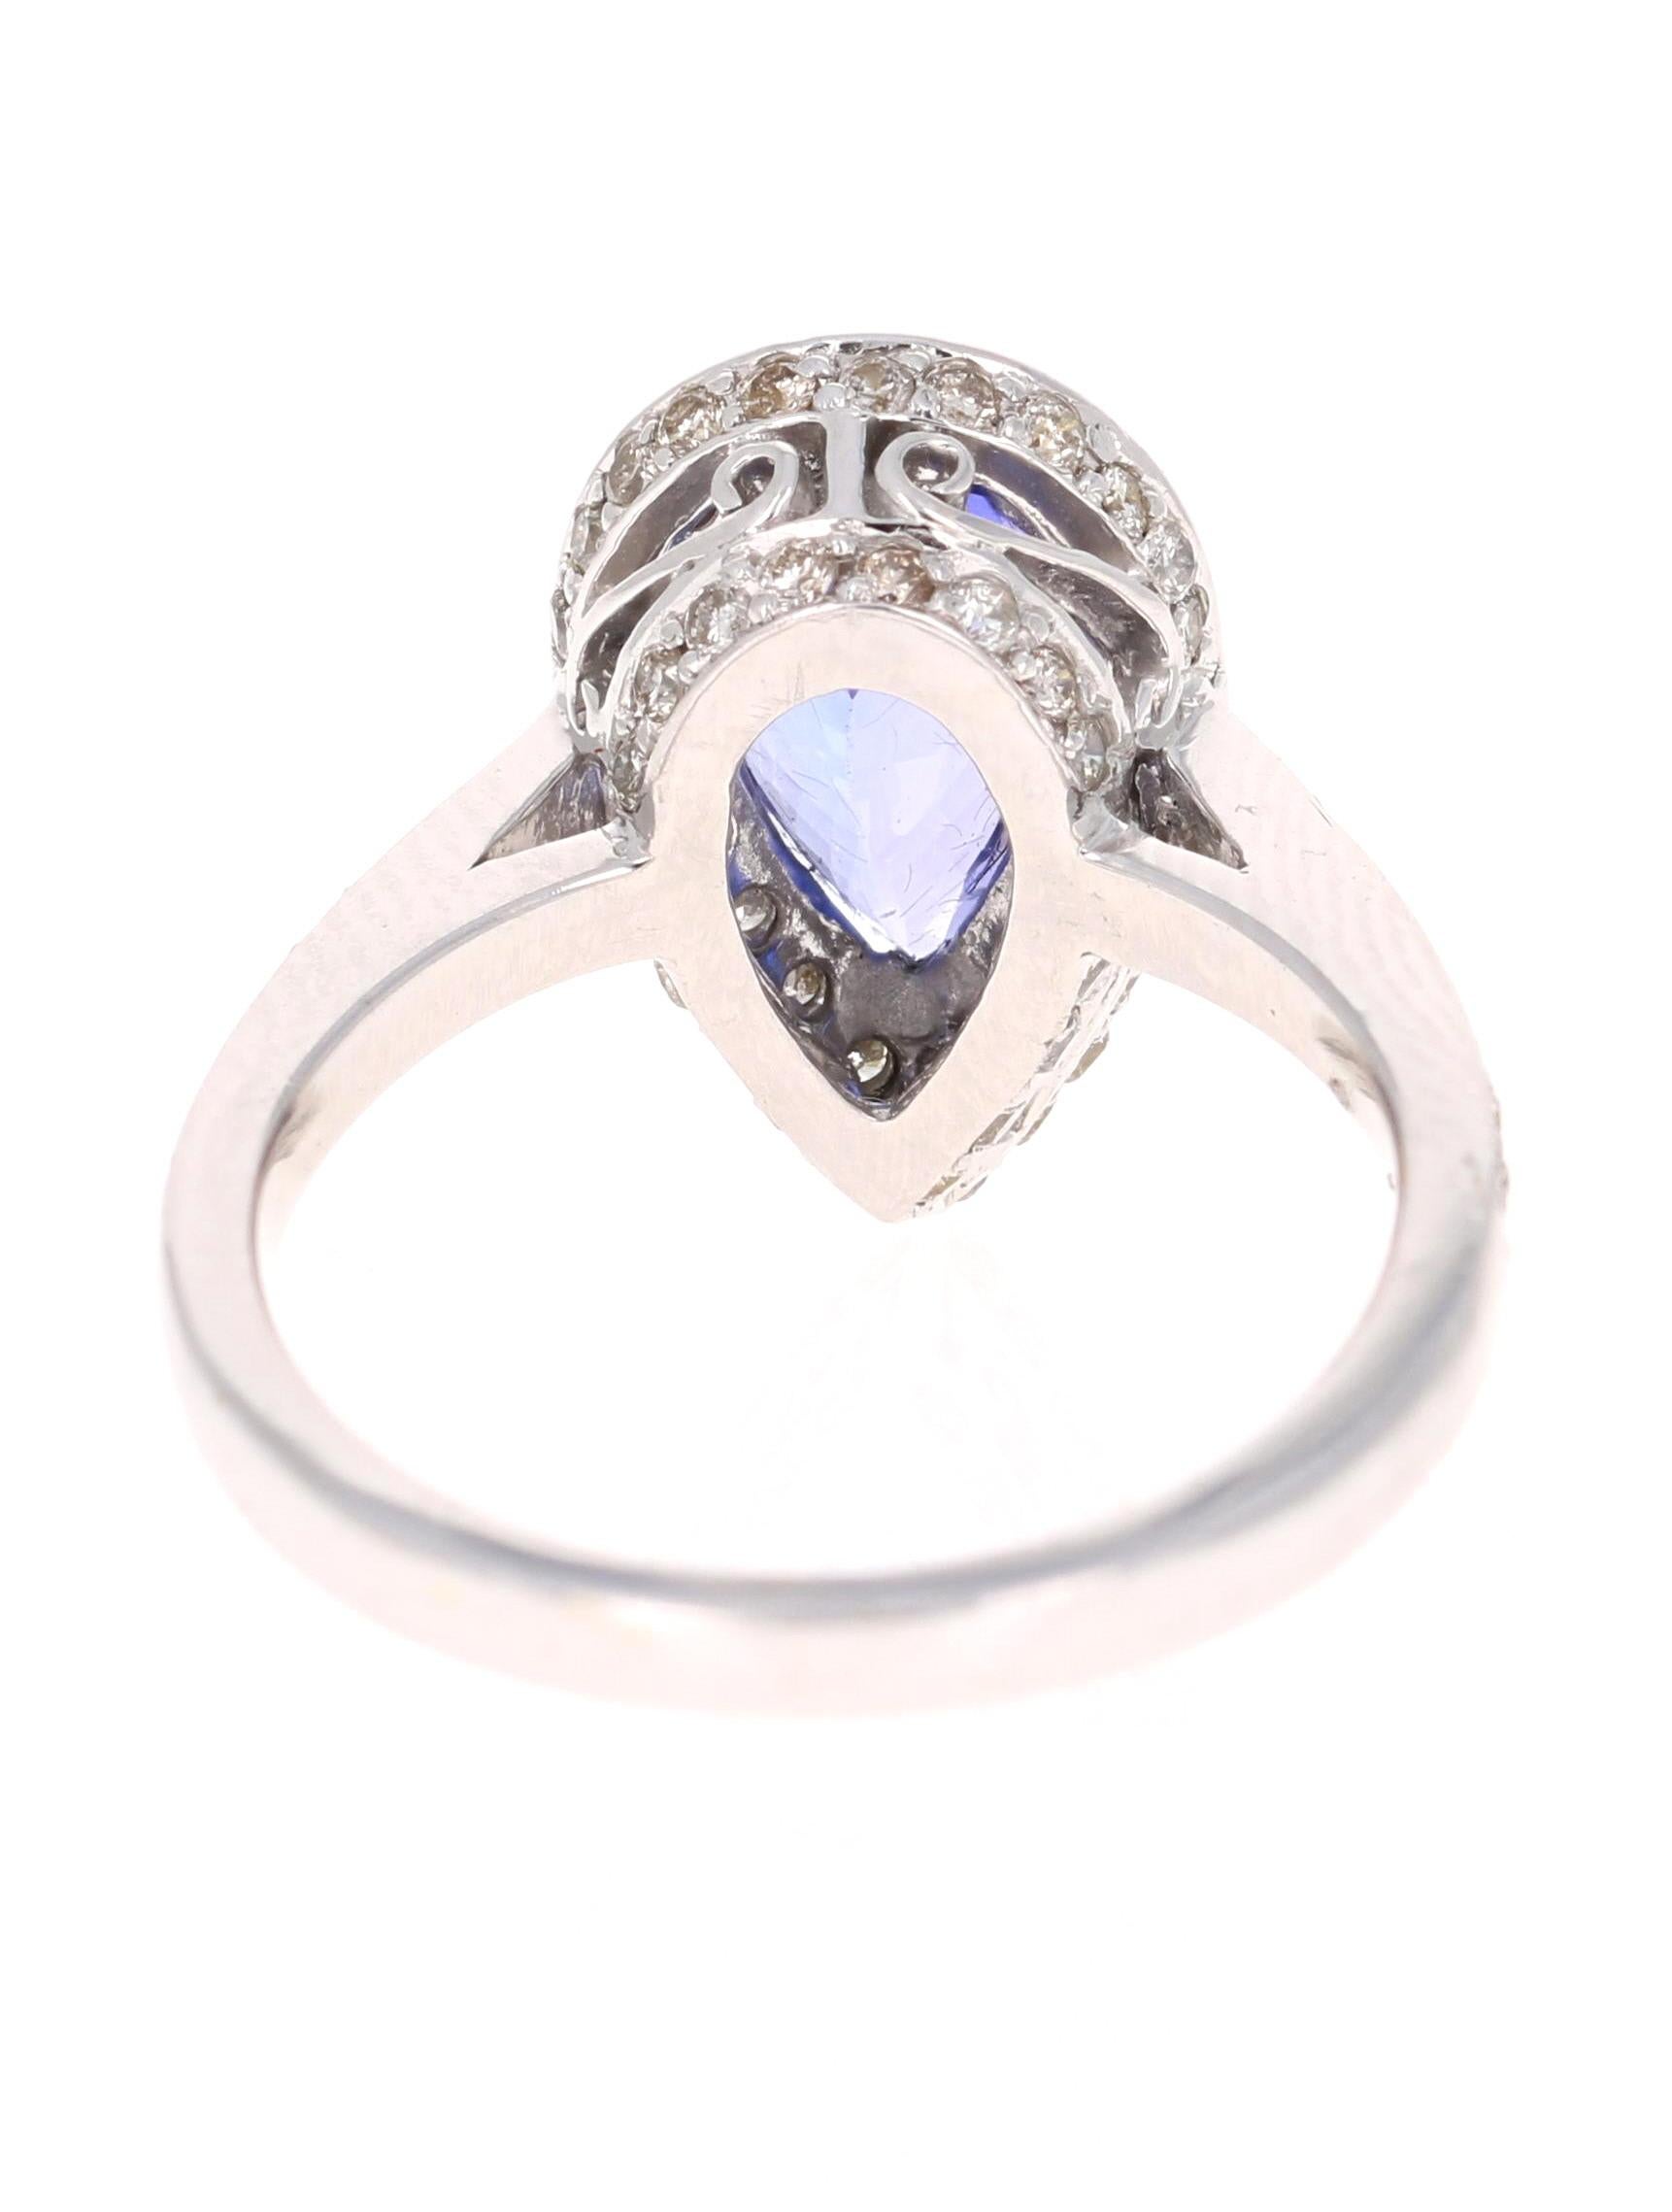 2.27 Carat Pear Cut Tanzanite Diamond Cocktail Ring 18 Karat White Gold In New Condition For Sale In Los Angeles, CA